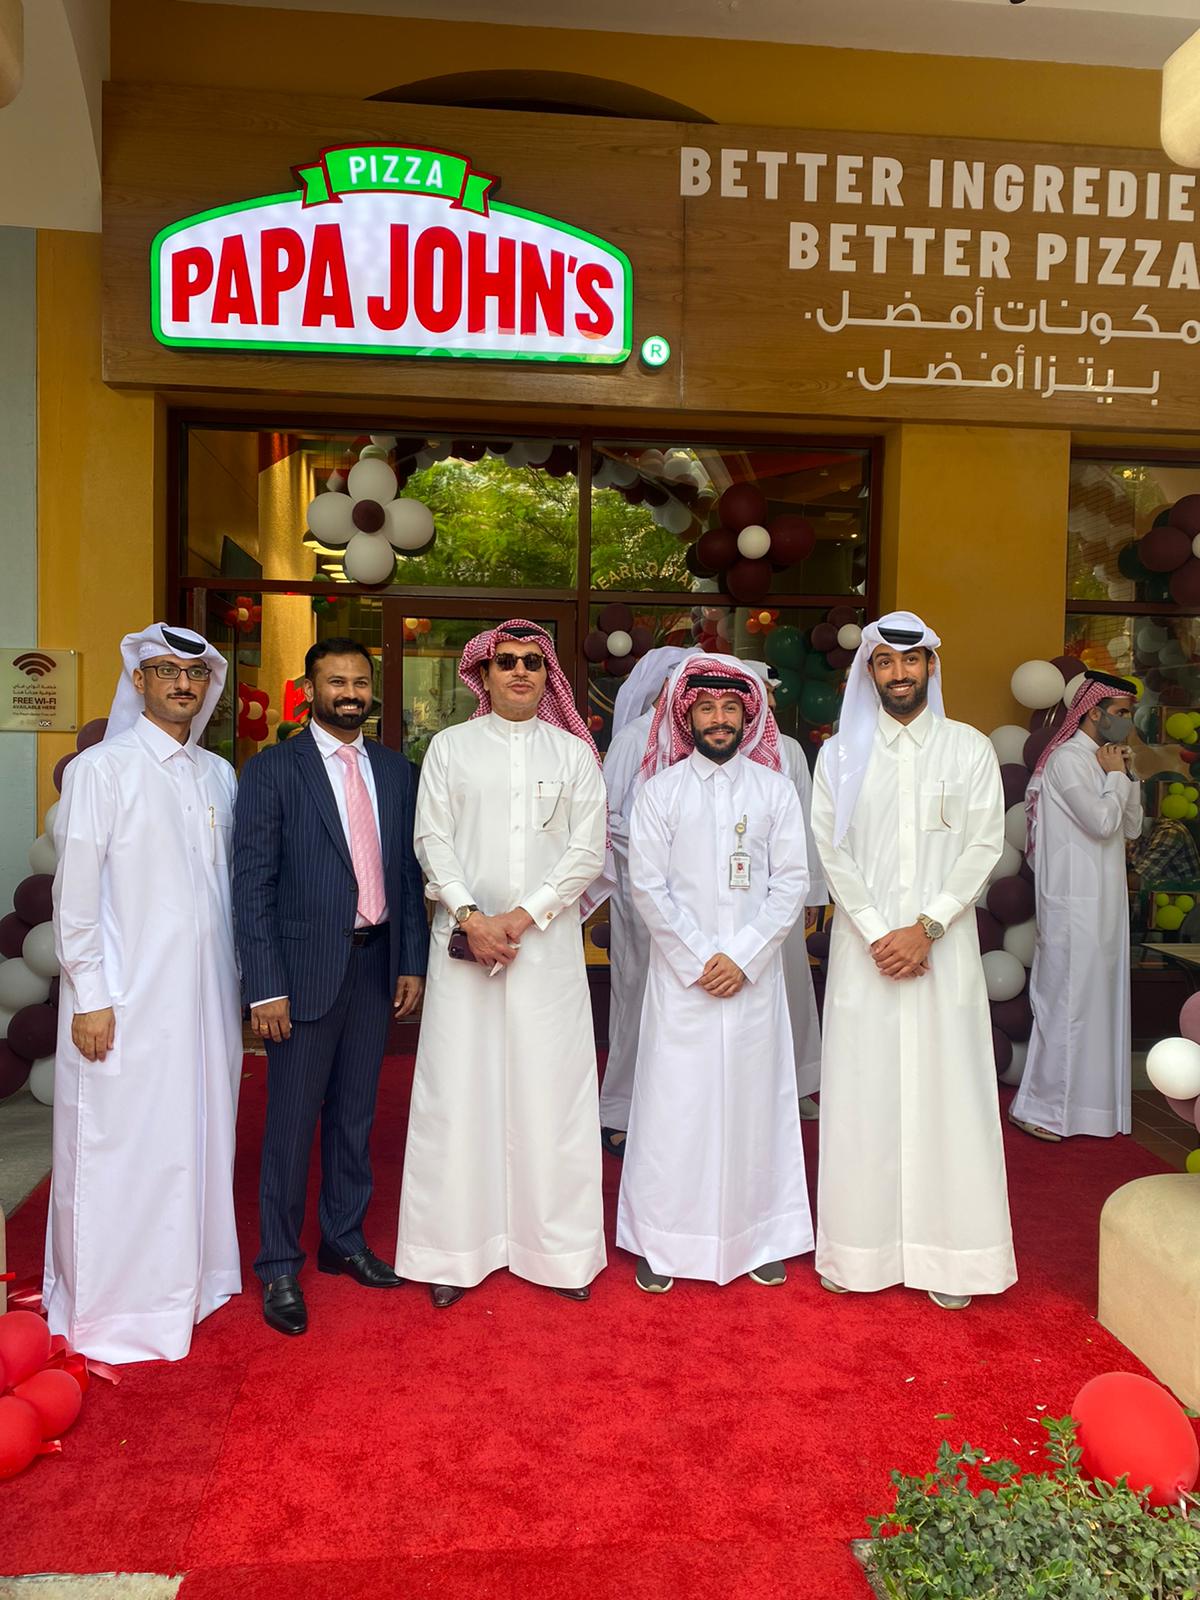 Papa John's Open Two New Outlets in Qatar's in Single Day!